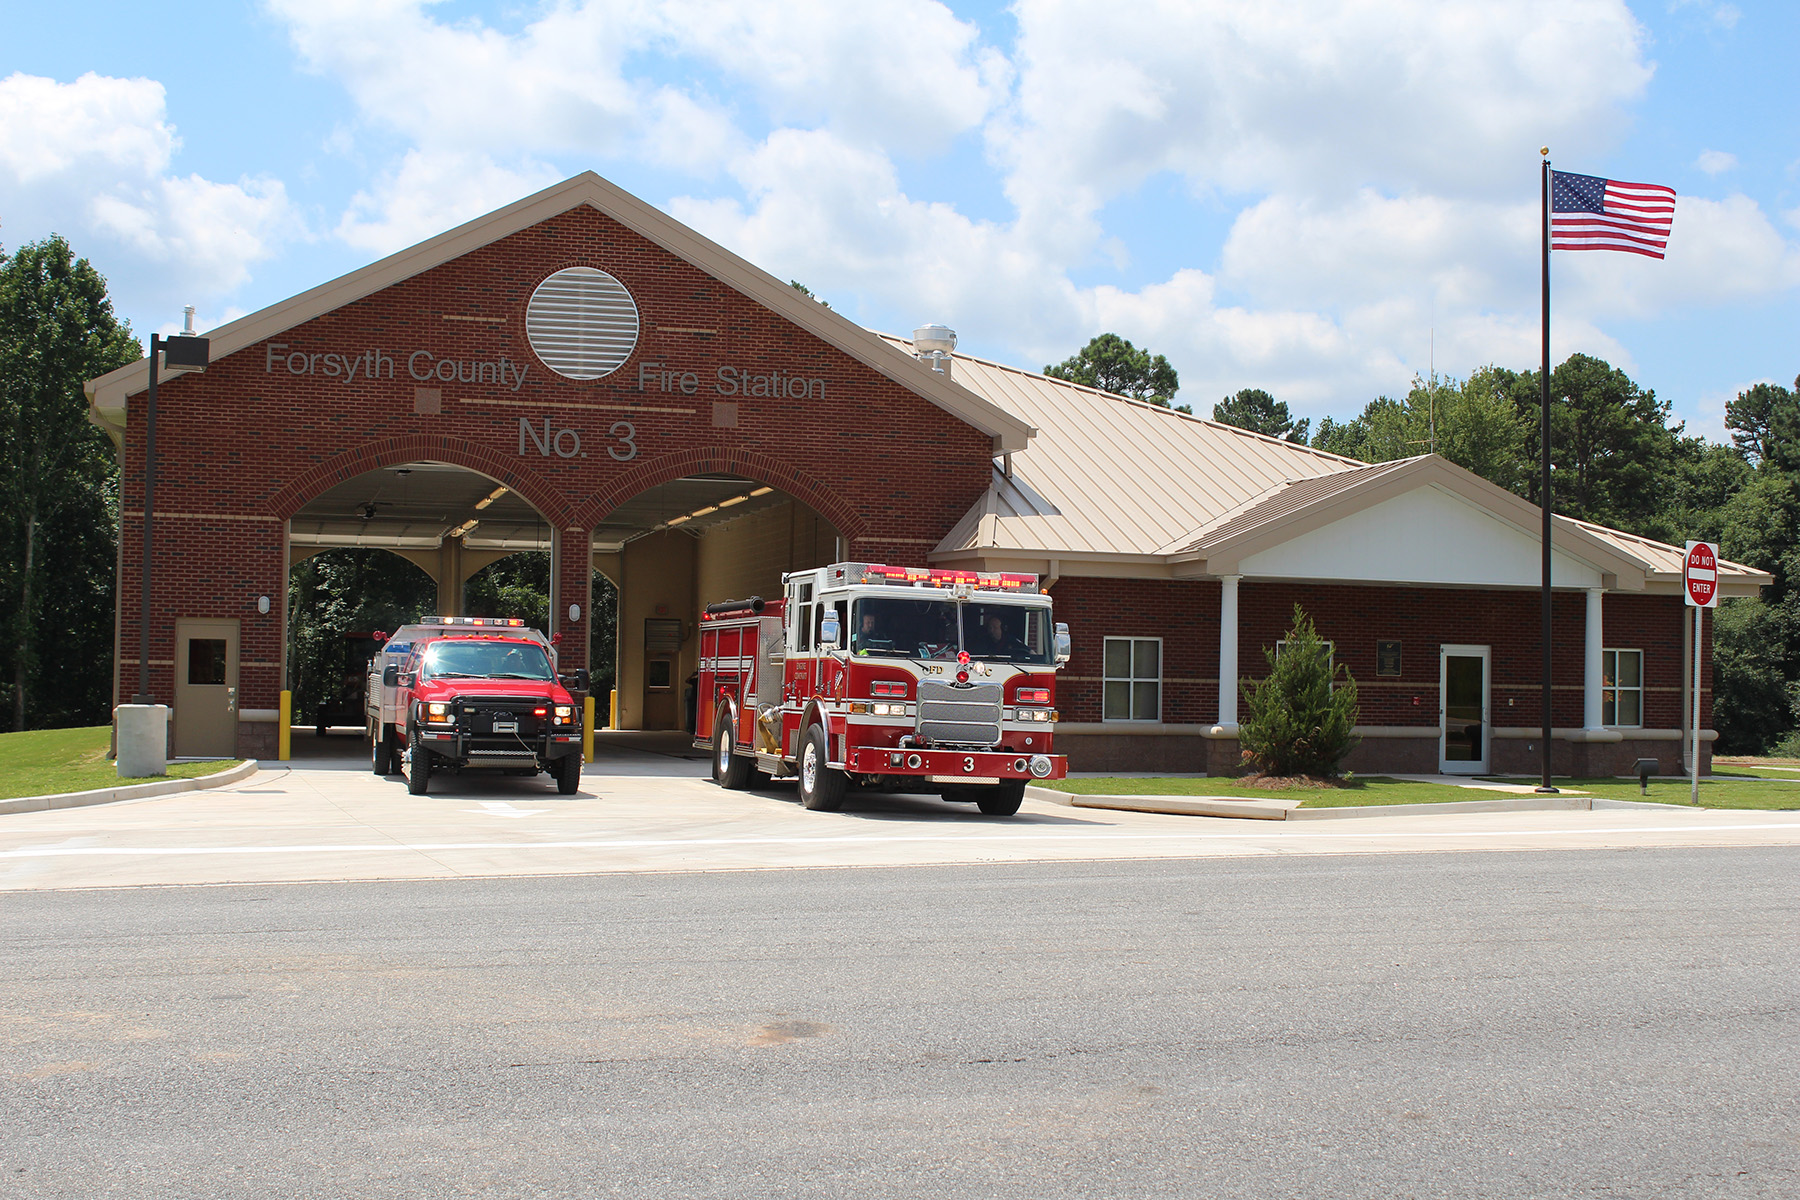 Community Invited to Tour Fire Station June 1